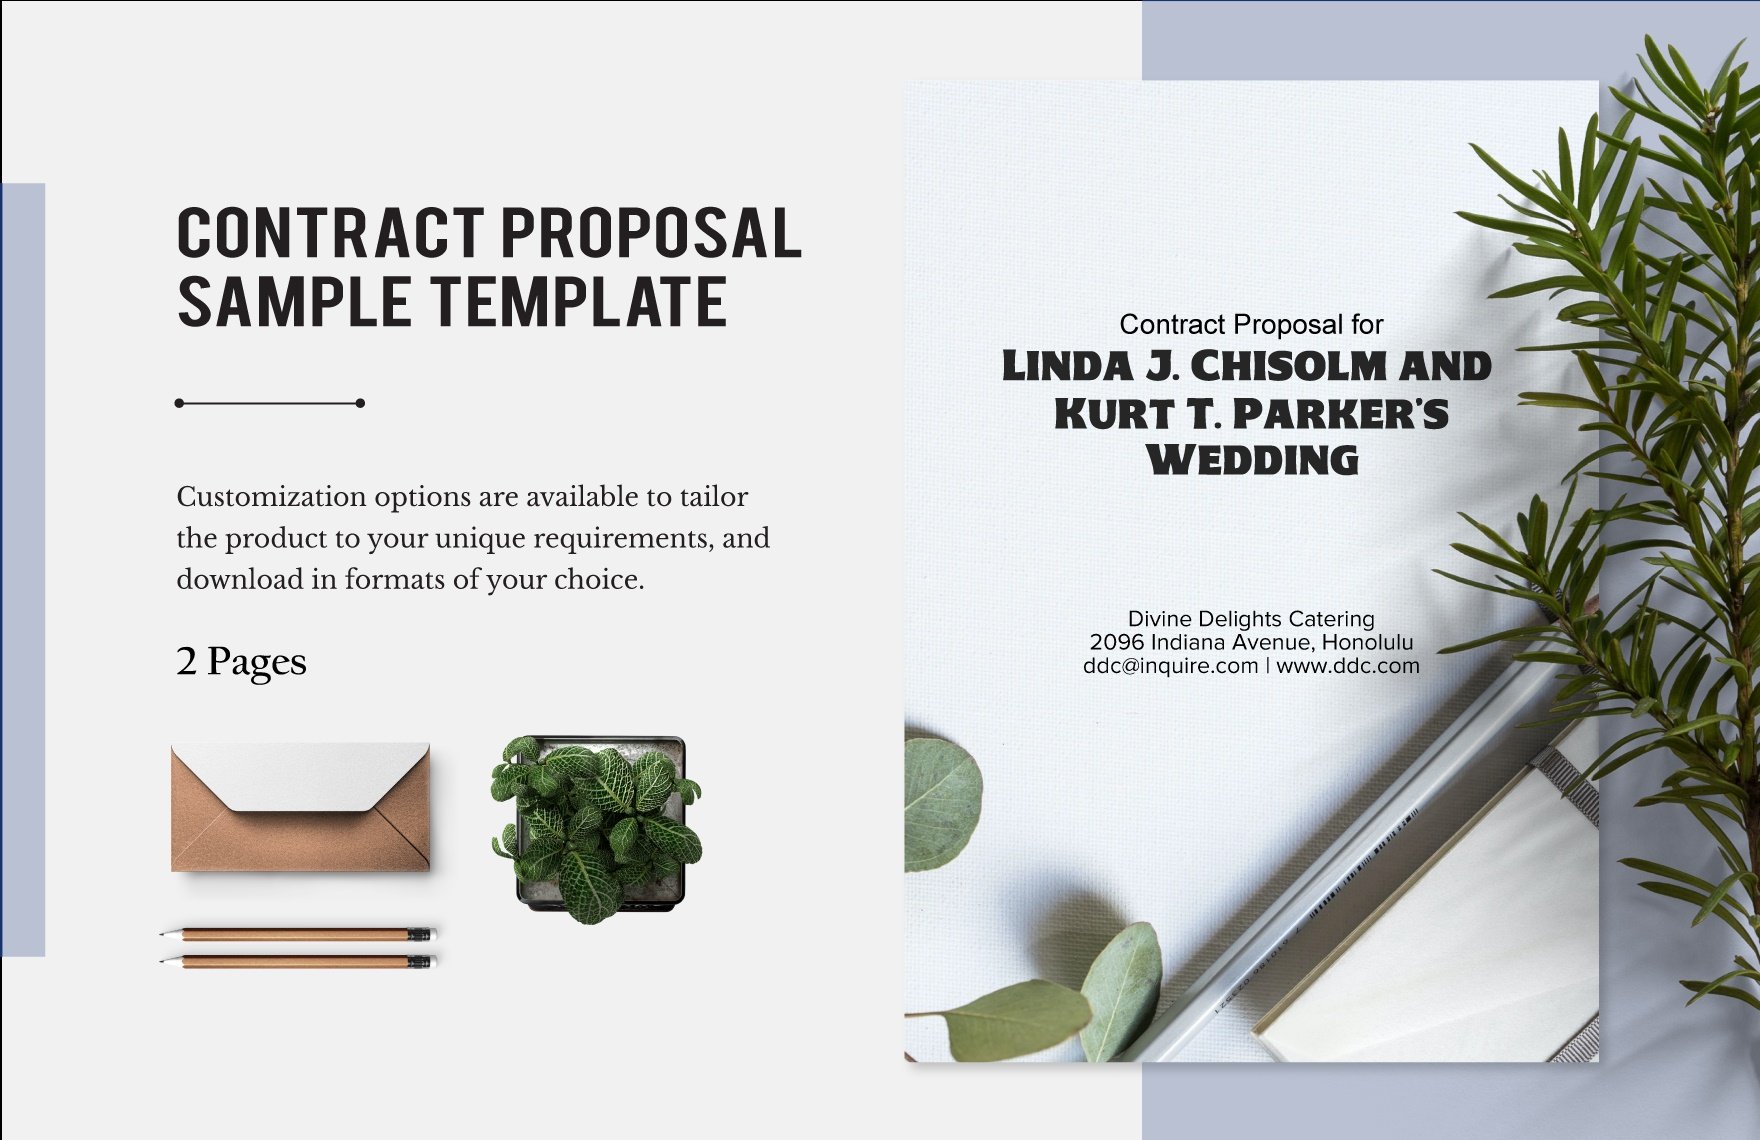 Contract Proposal Sample Template in Word, Google Docs, PDF, Apple Pages